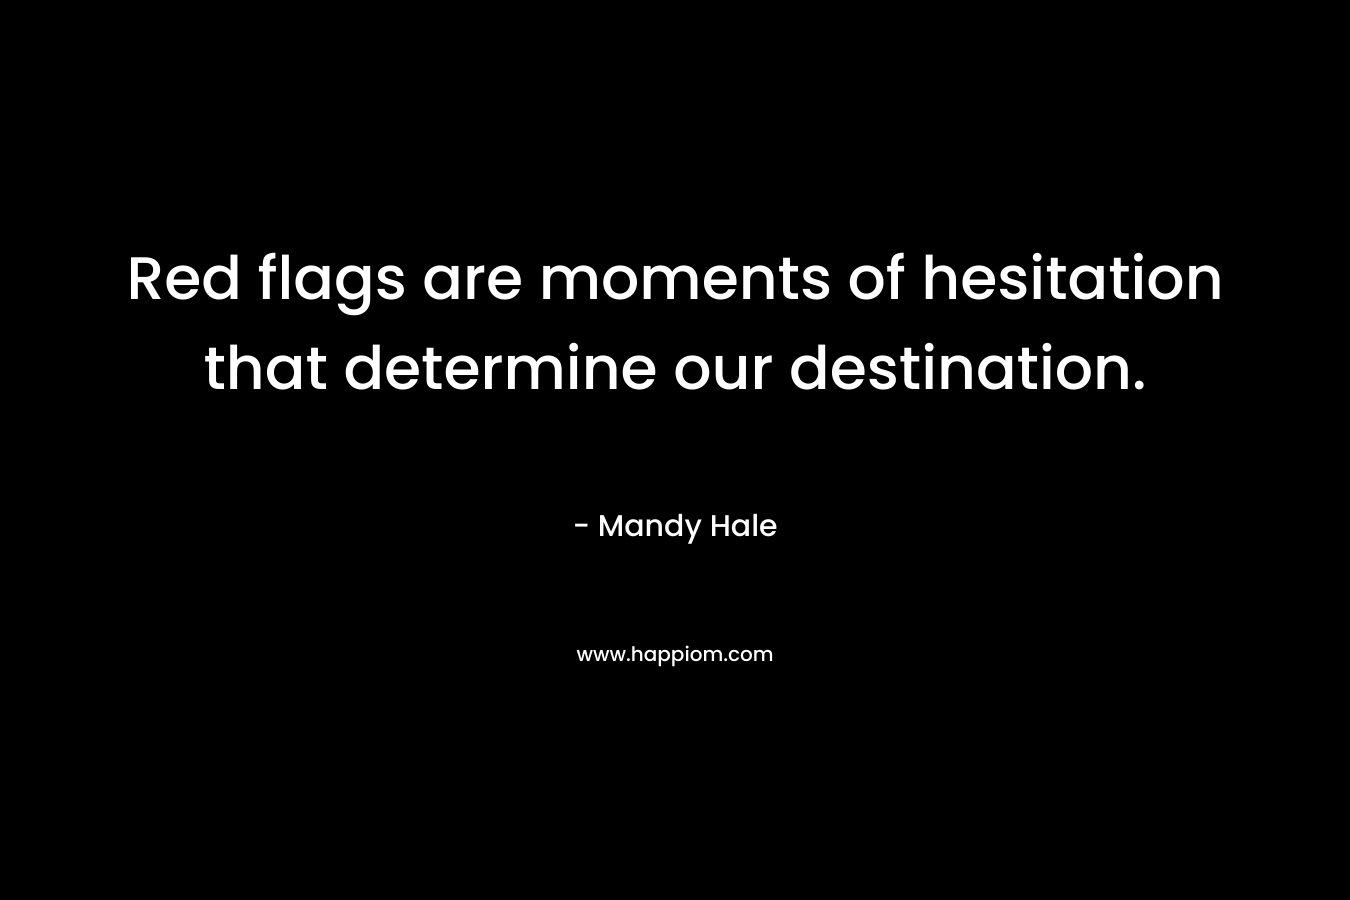 Red flags are moments of hesitation that determine our destination. – Mandy Hale